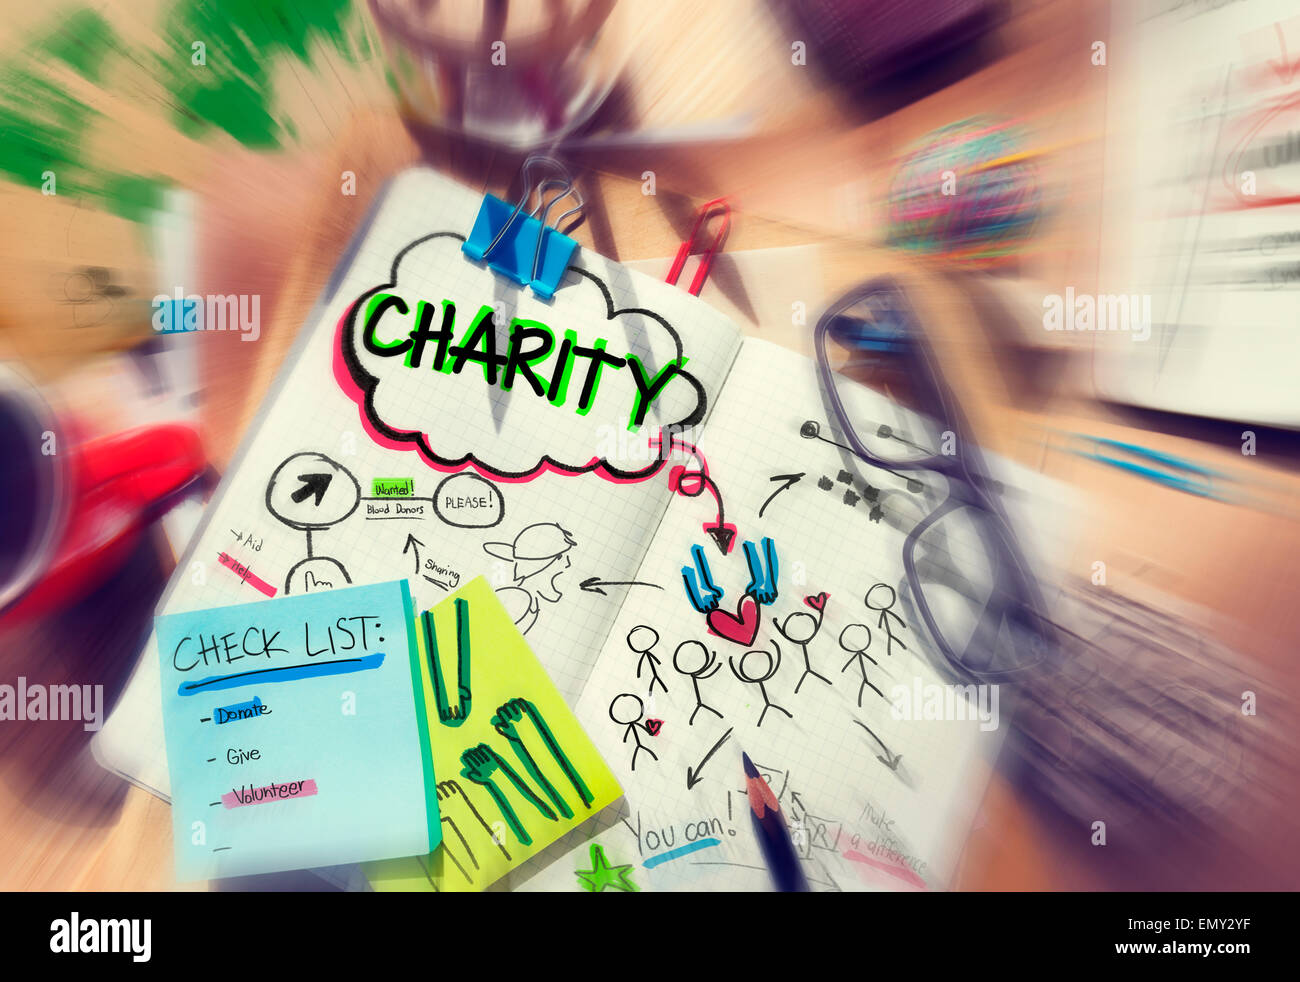 Check List Sharing Help Charity Concepts Stock Photo